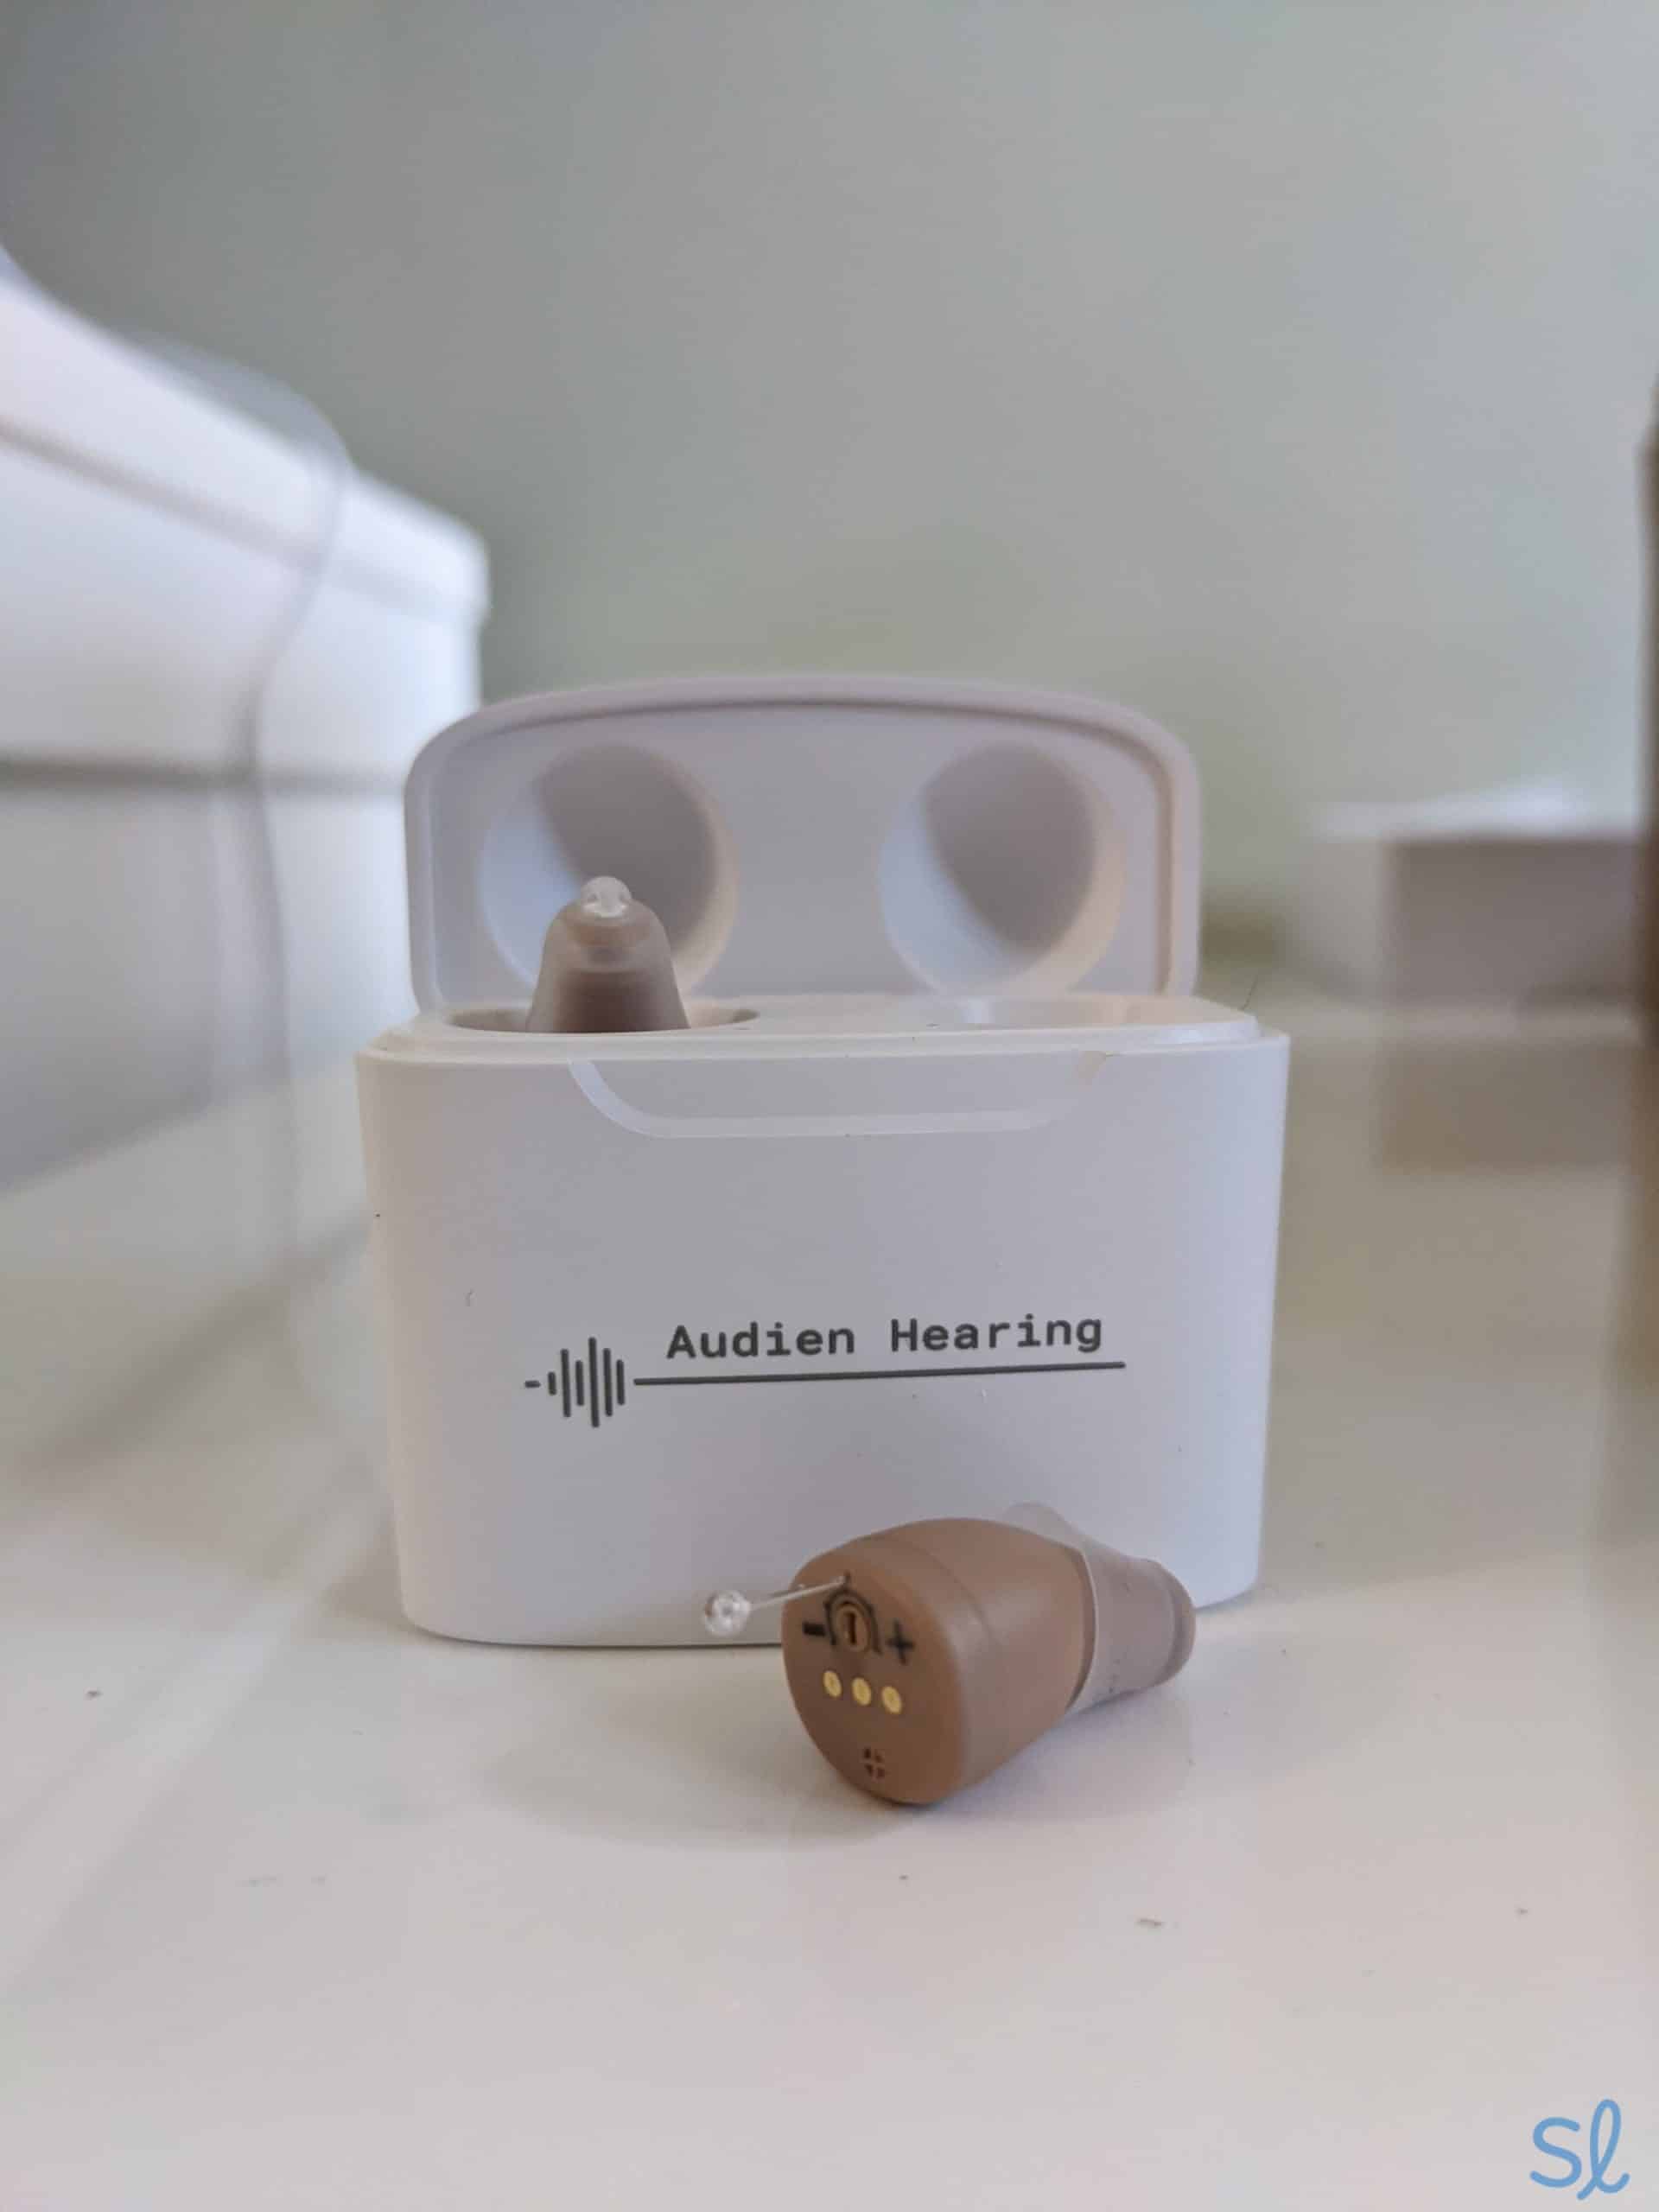 Audien Atom Pro hearing aids inside and outside of the portable charging case